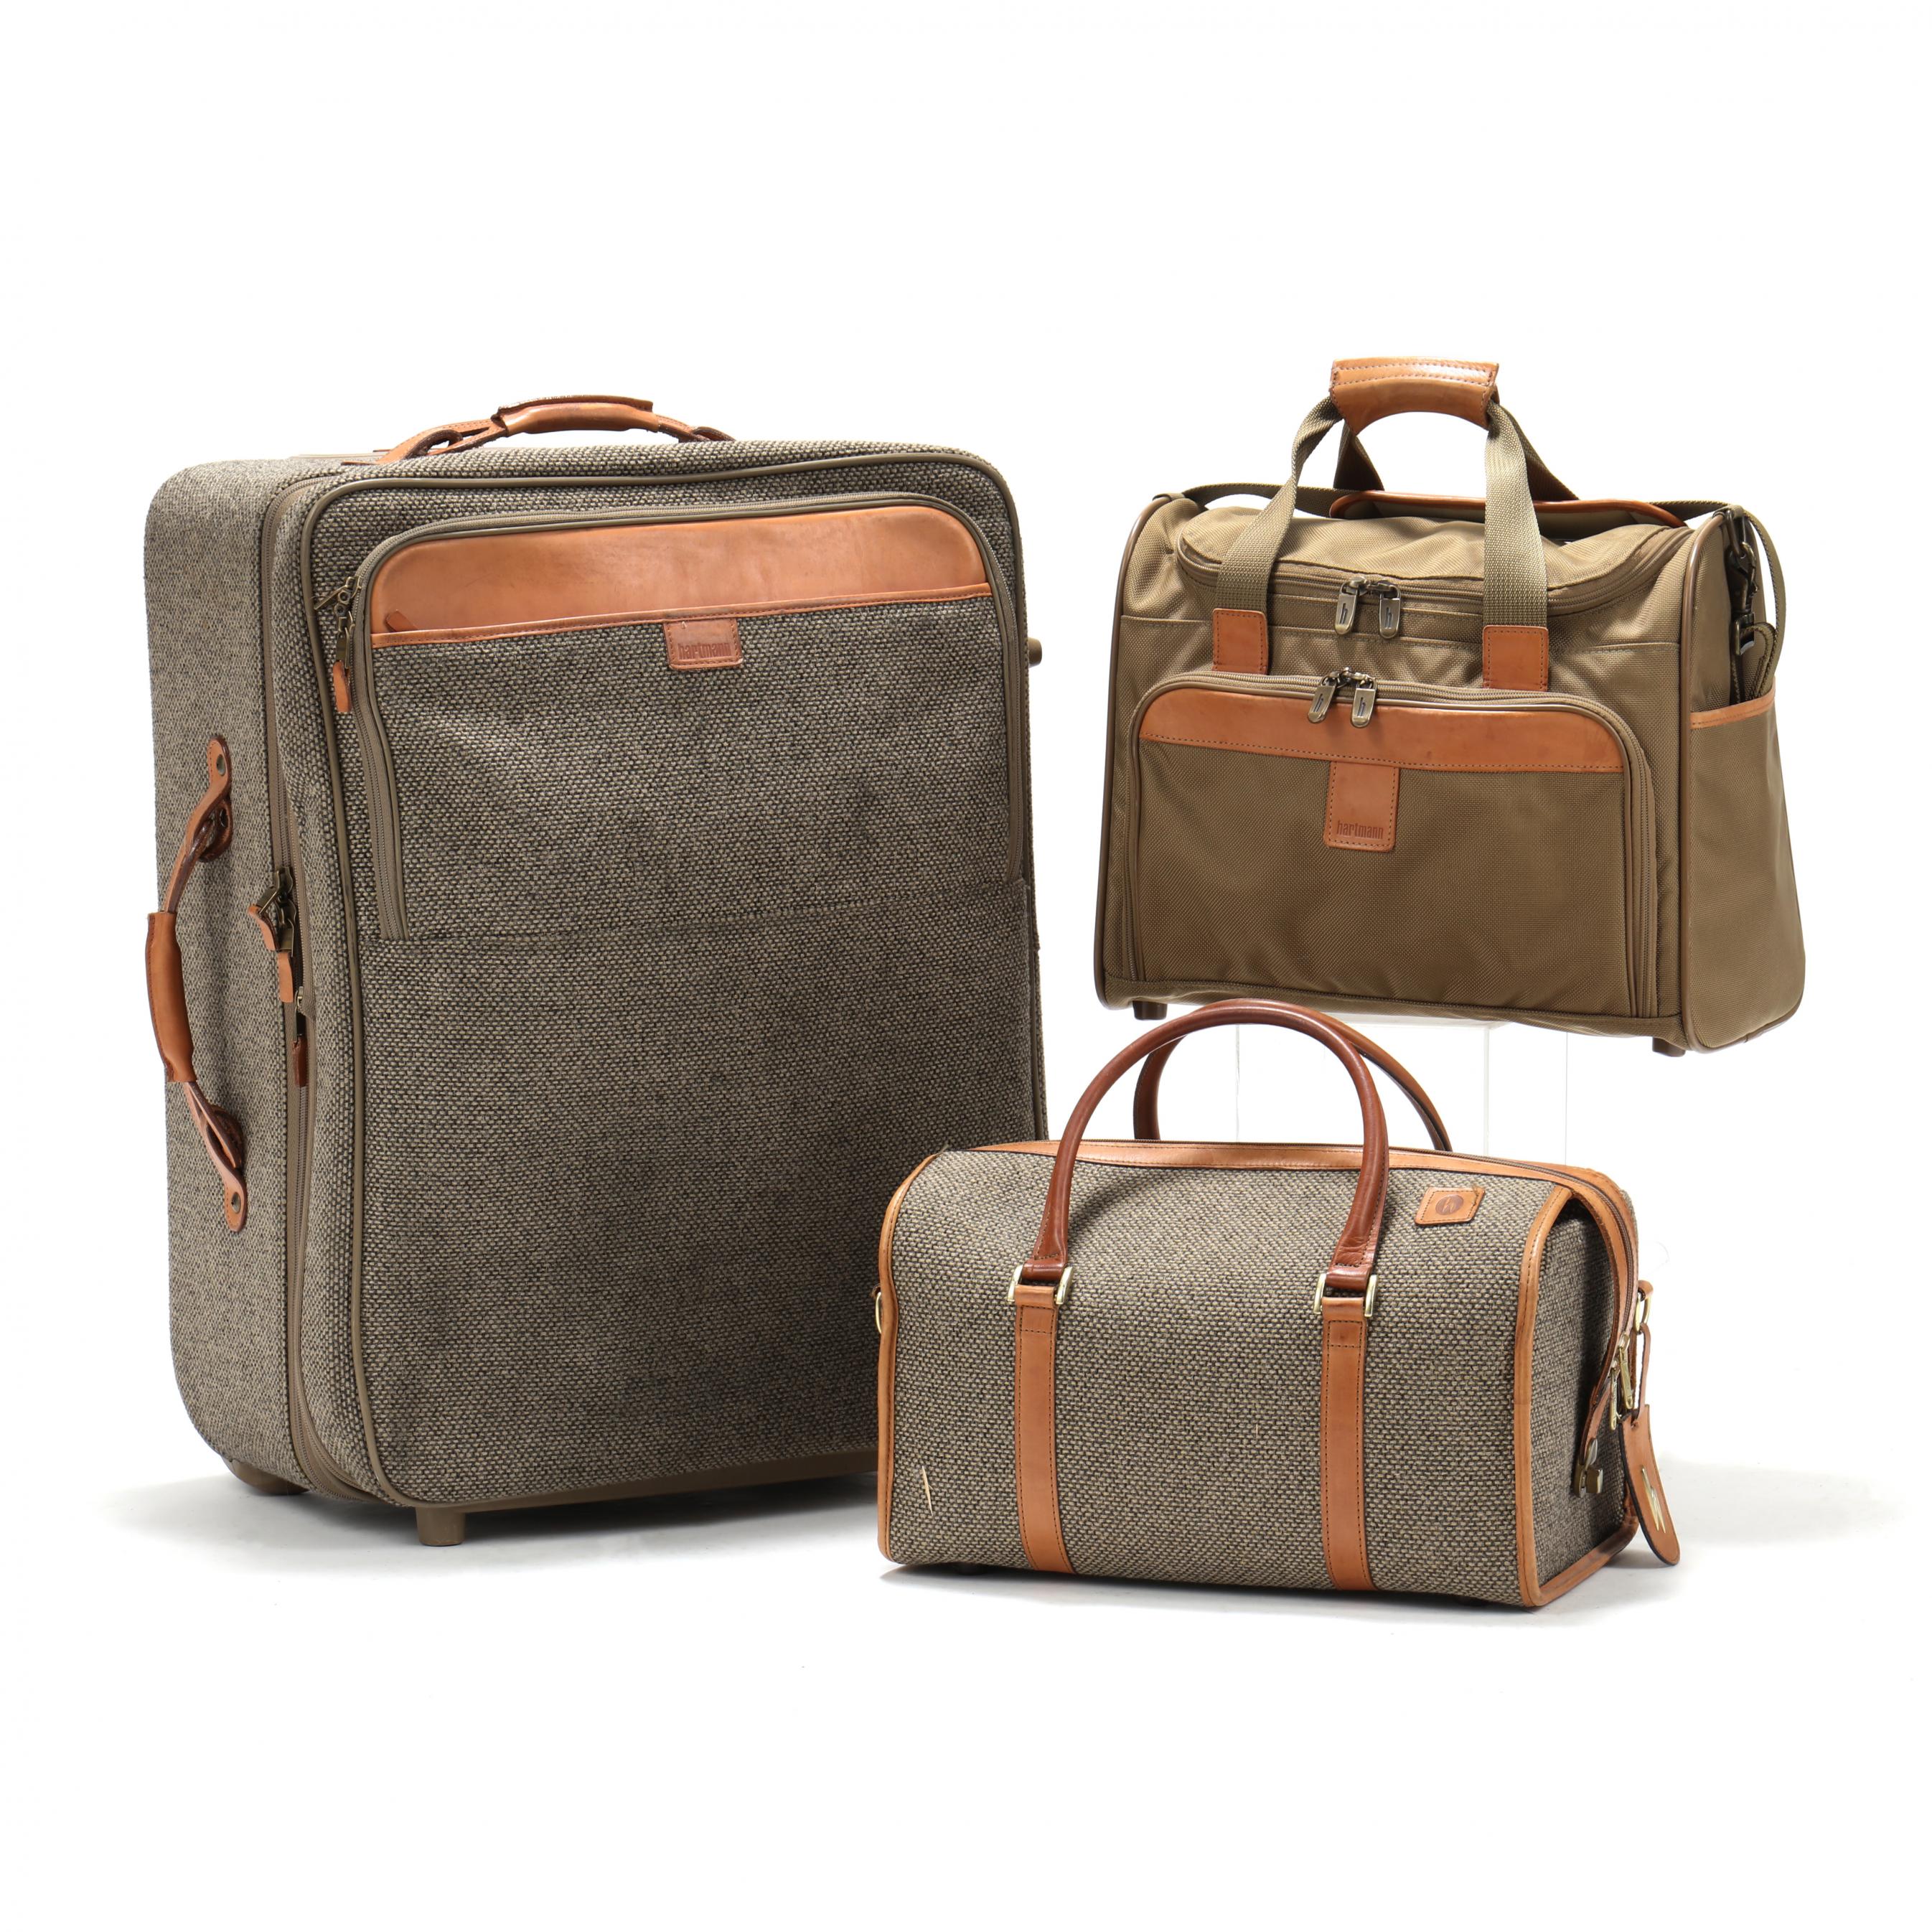 Pair of Hartmann Leather Suitcase's